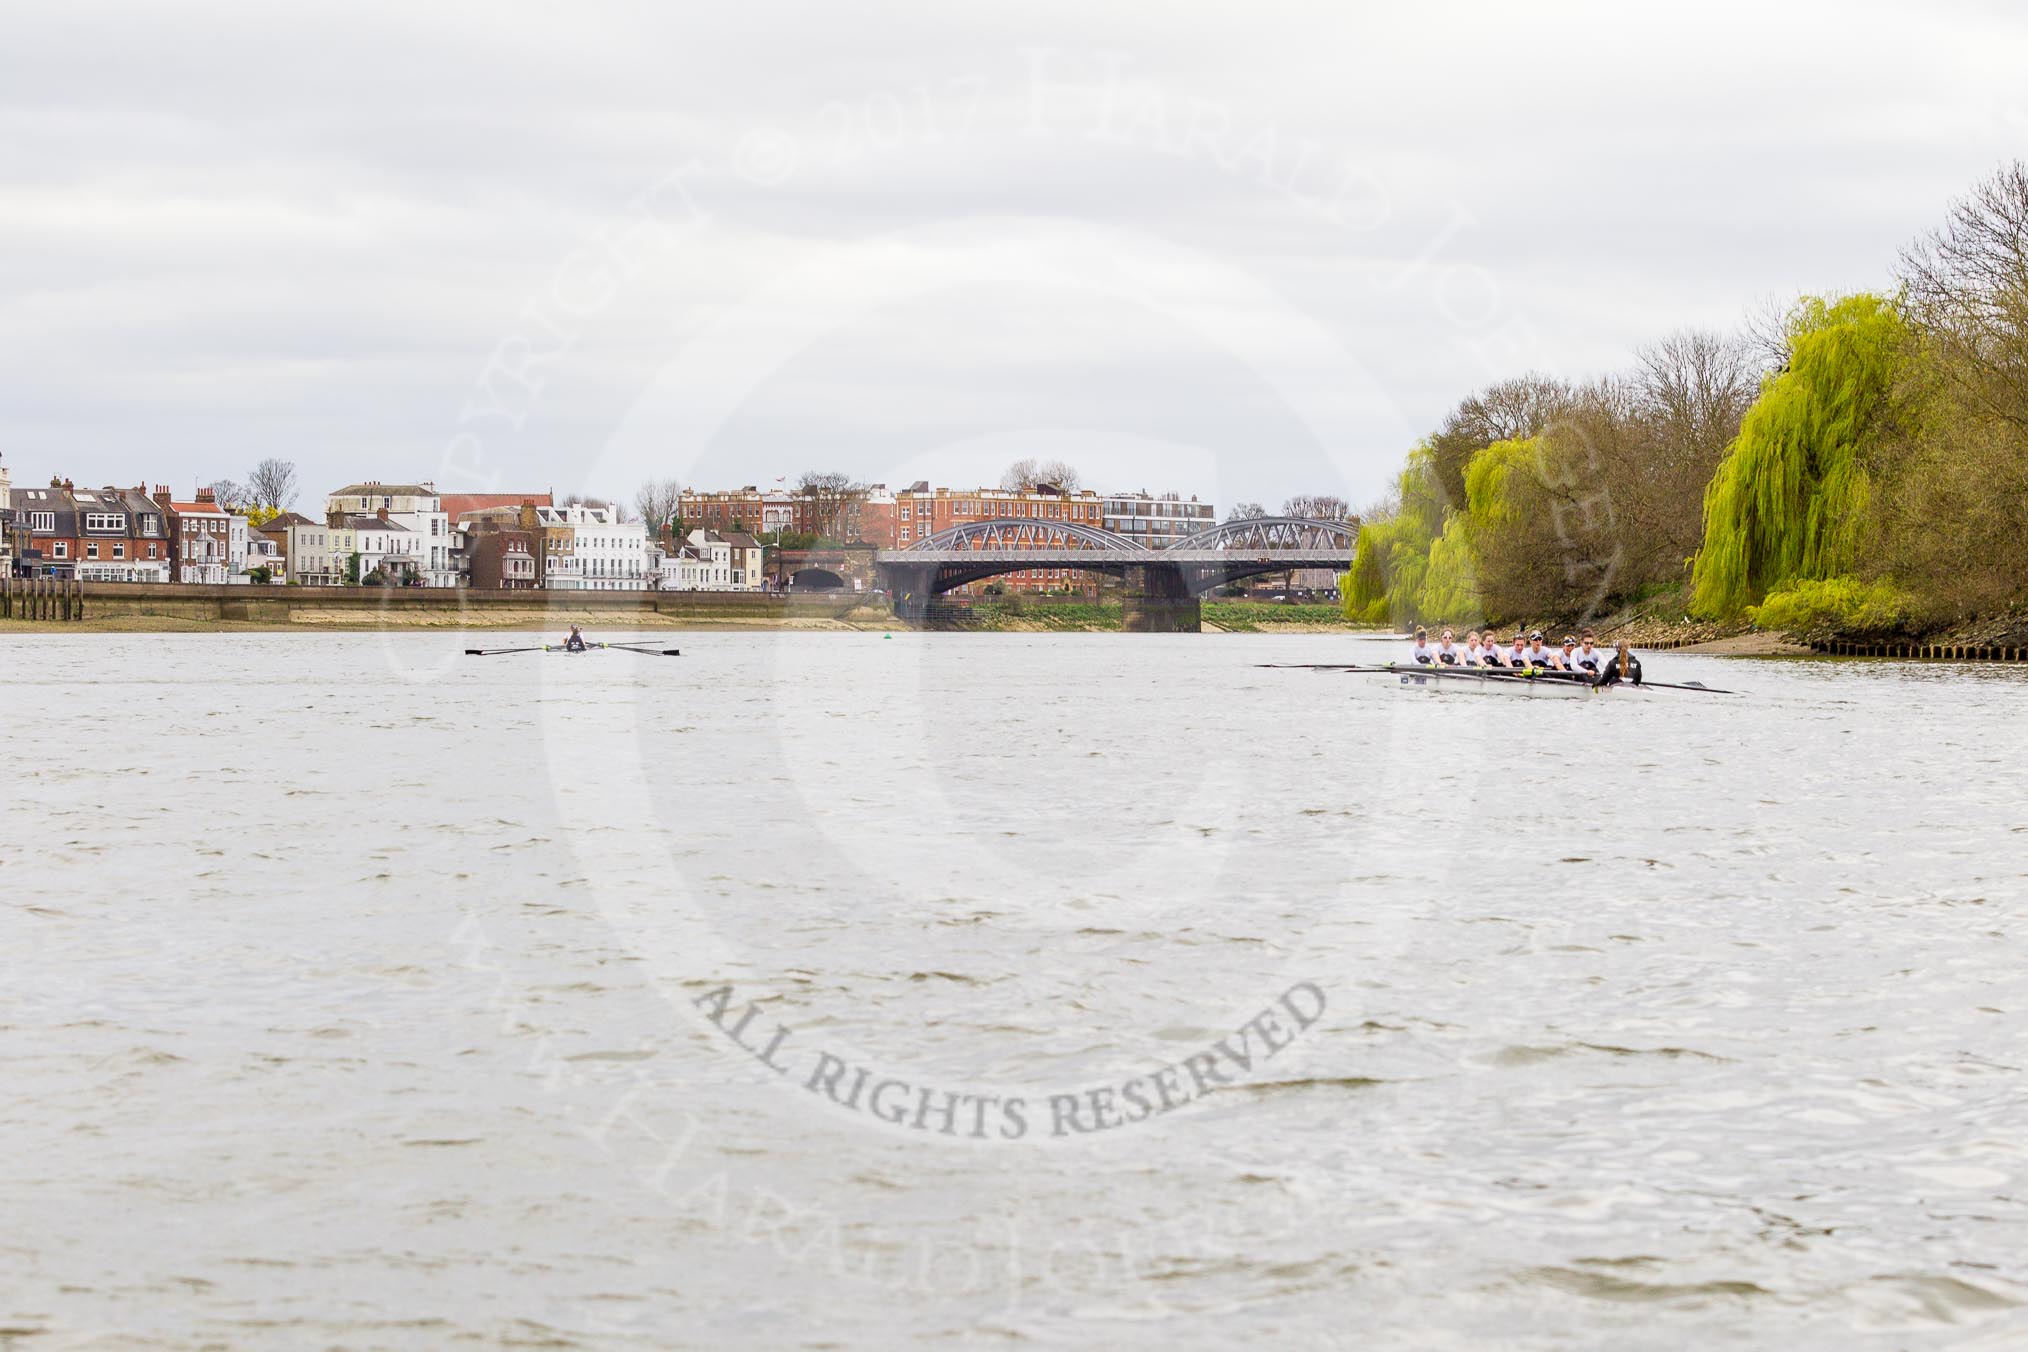 The Cancer Research UK Boat Race season 2017 - Women's Boat Race Fixture OUWBC vs Molesey BC: OUWBC and Molesy about to start the second part of the fixture, near Barnes Railway Bridge.
River Thames between Putney Bridge and Mortlake,
London SW15,

United Kingdom,
on 19 March 2017 at 16:19, image #123